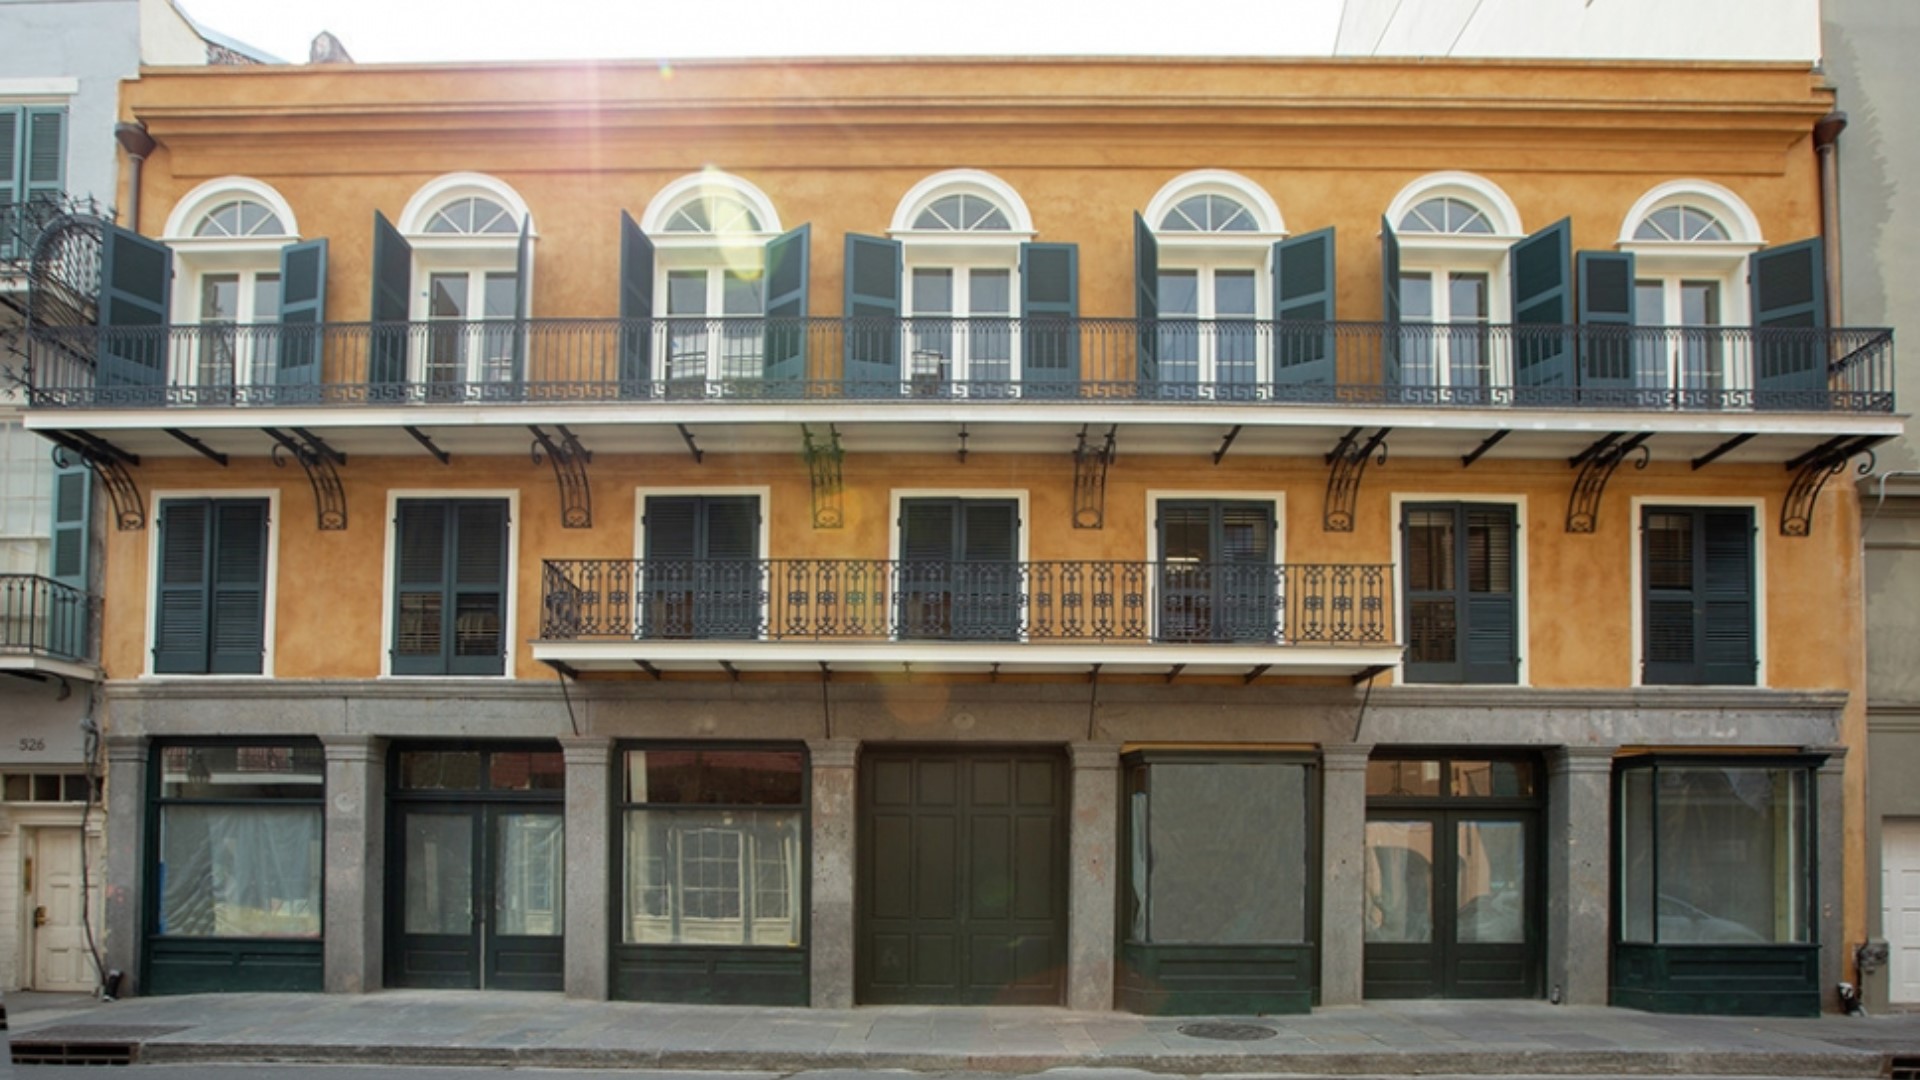 Former home of WDSU at 520 Royal has been transformed into a $38 million museum showcasing history of the French Quarter